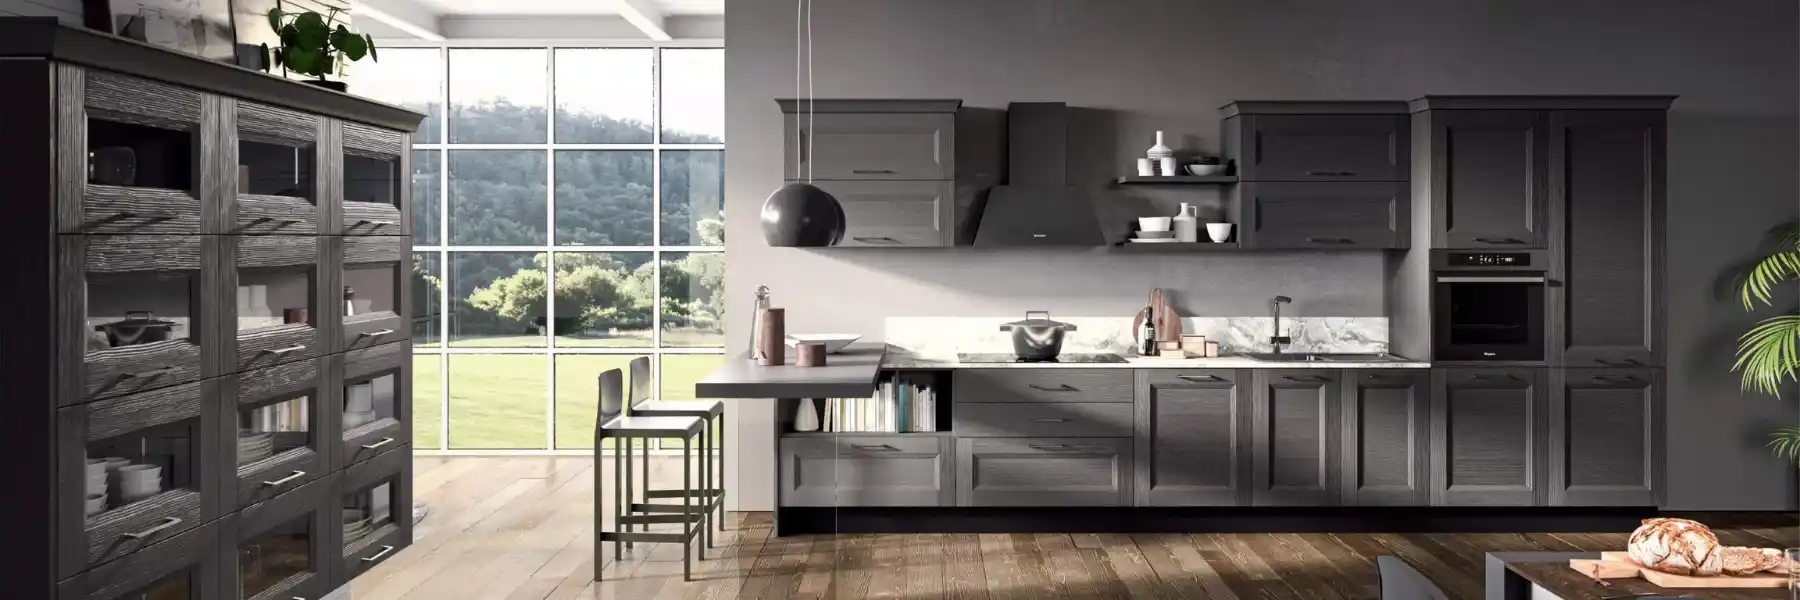 Outlet-cucine